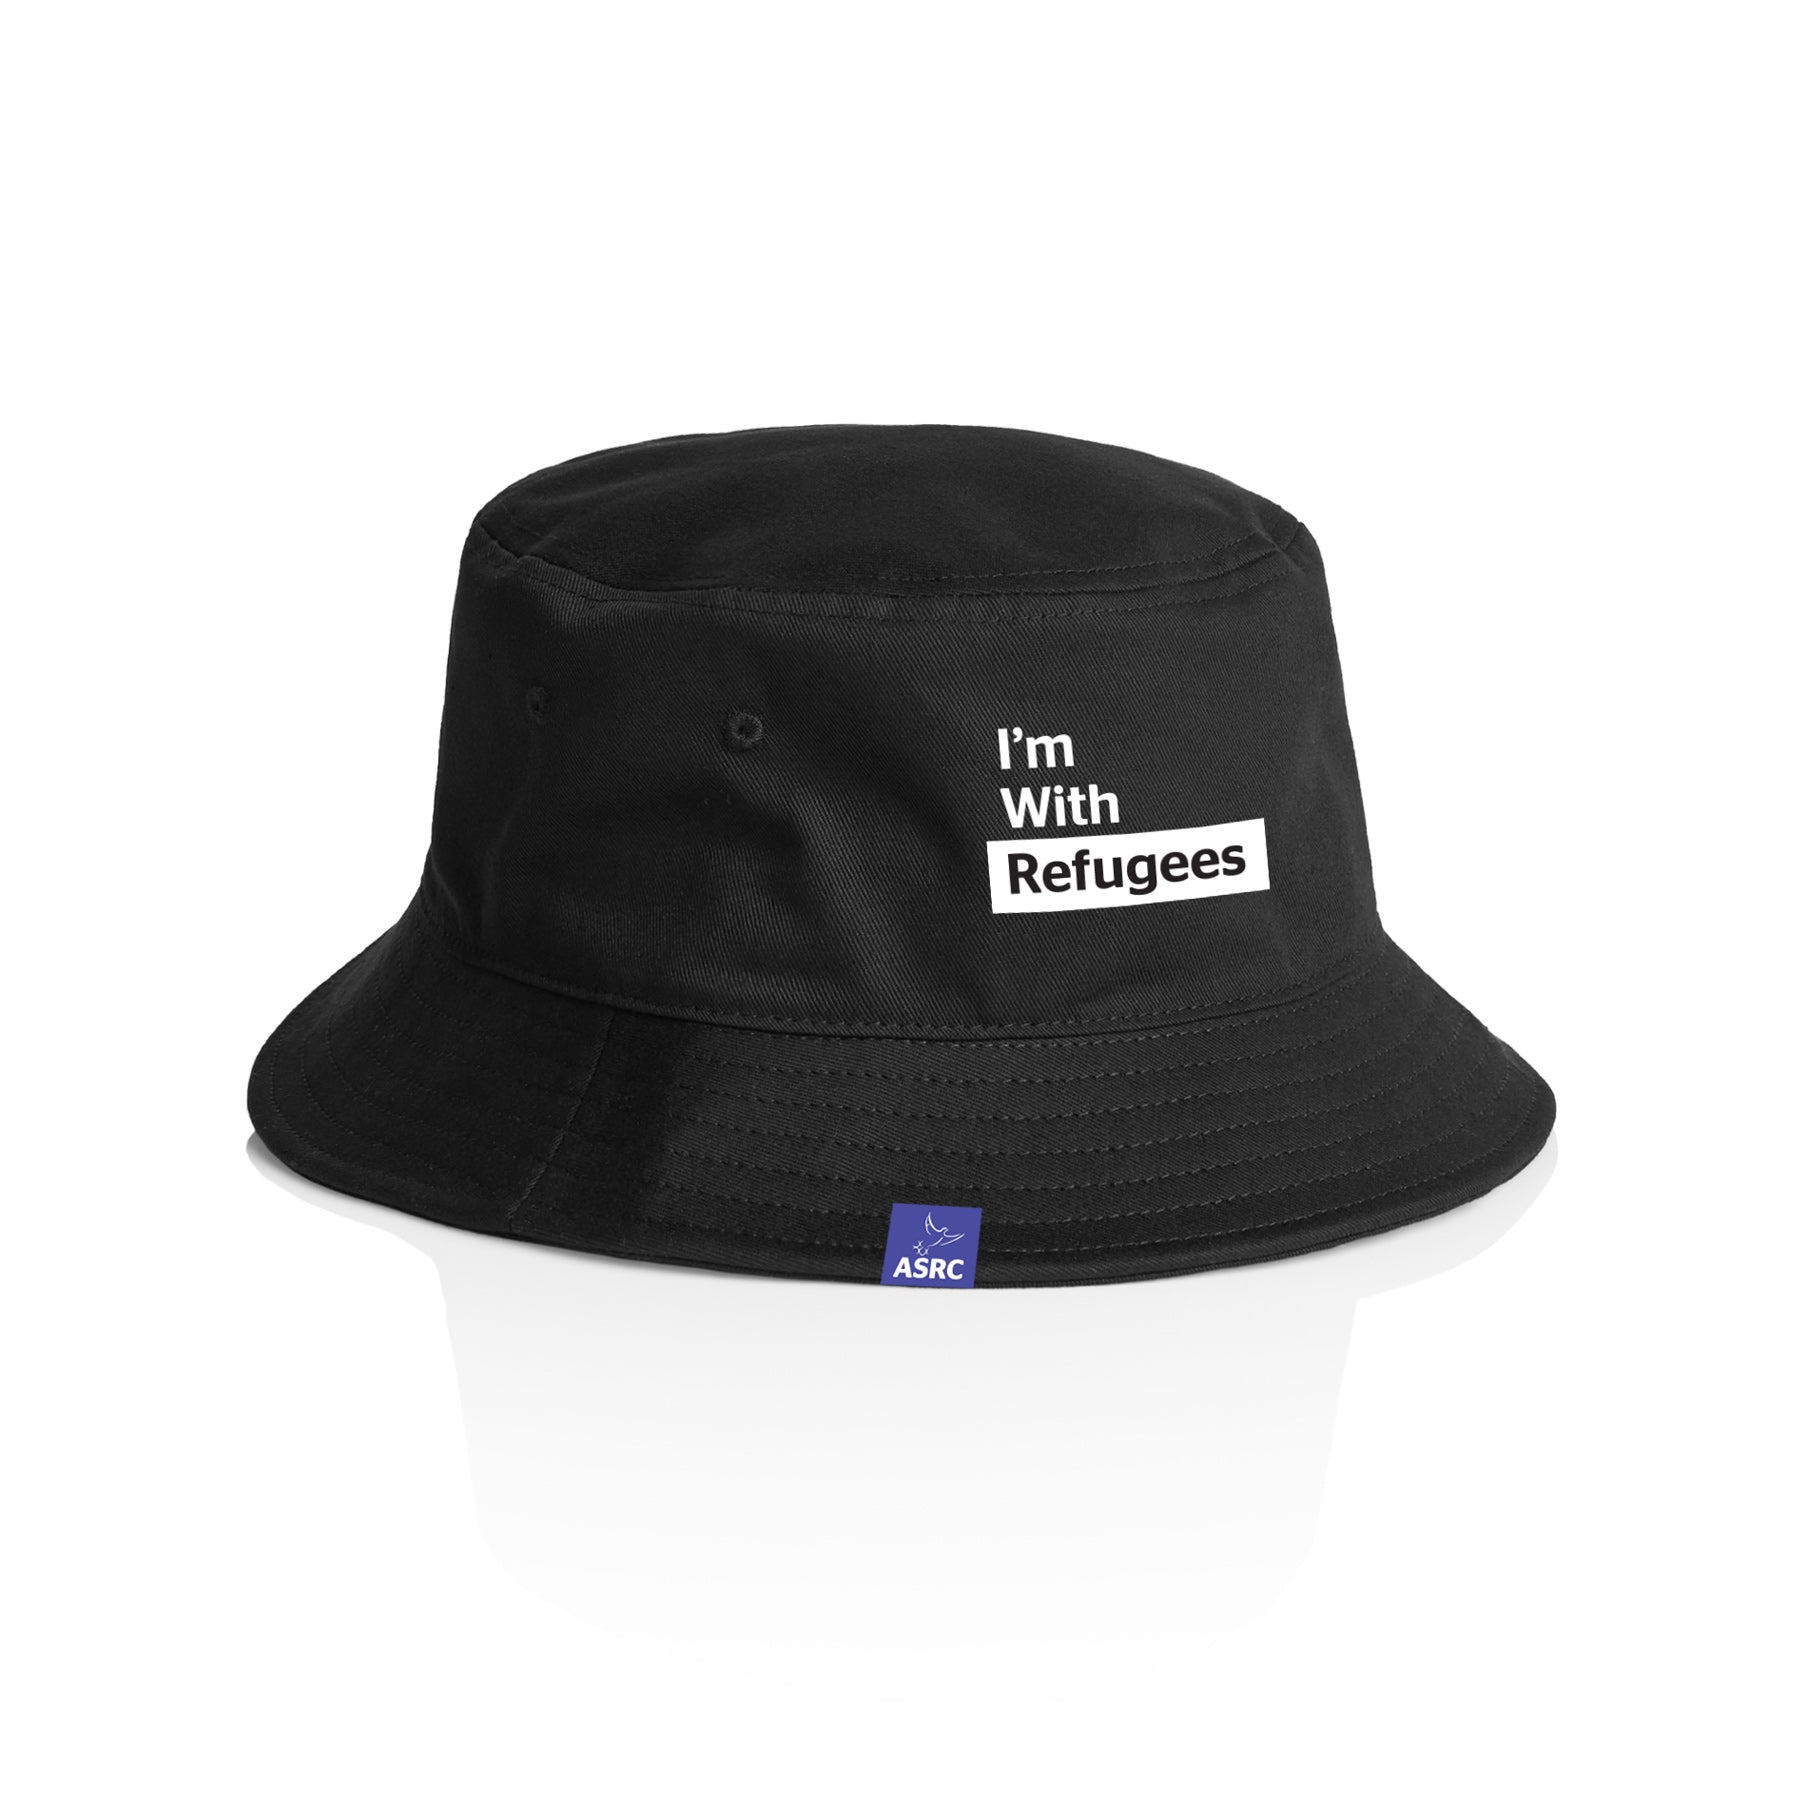 I'm With Refugees Bucket Hat - Adults (Black)